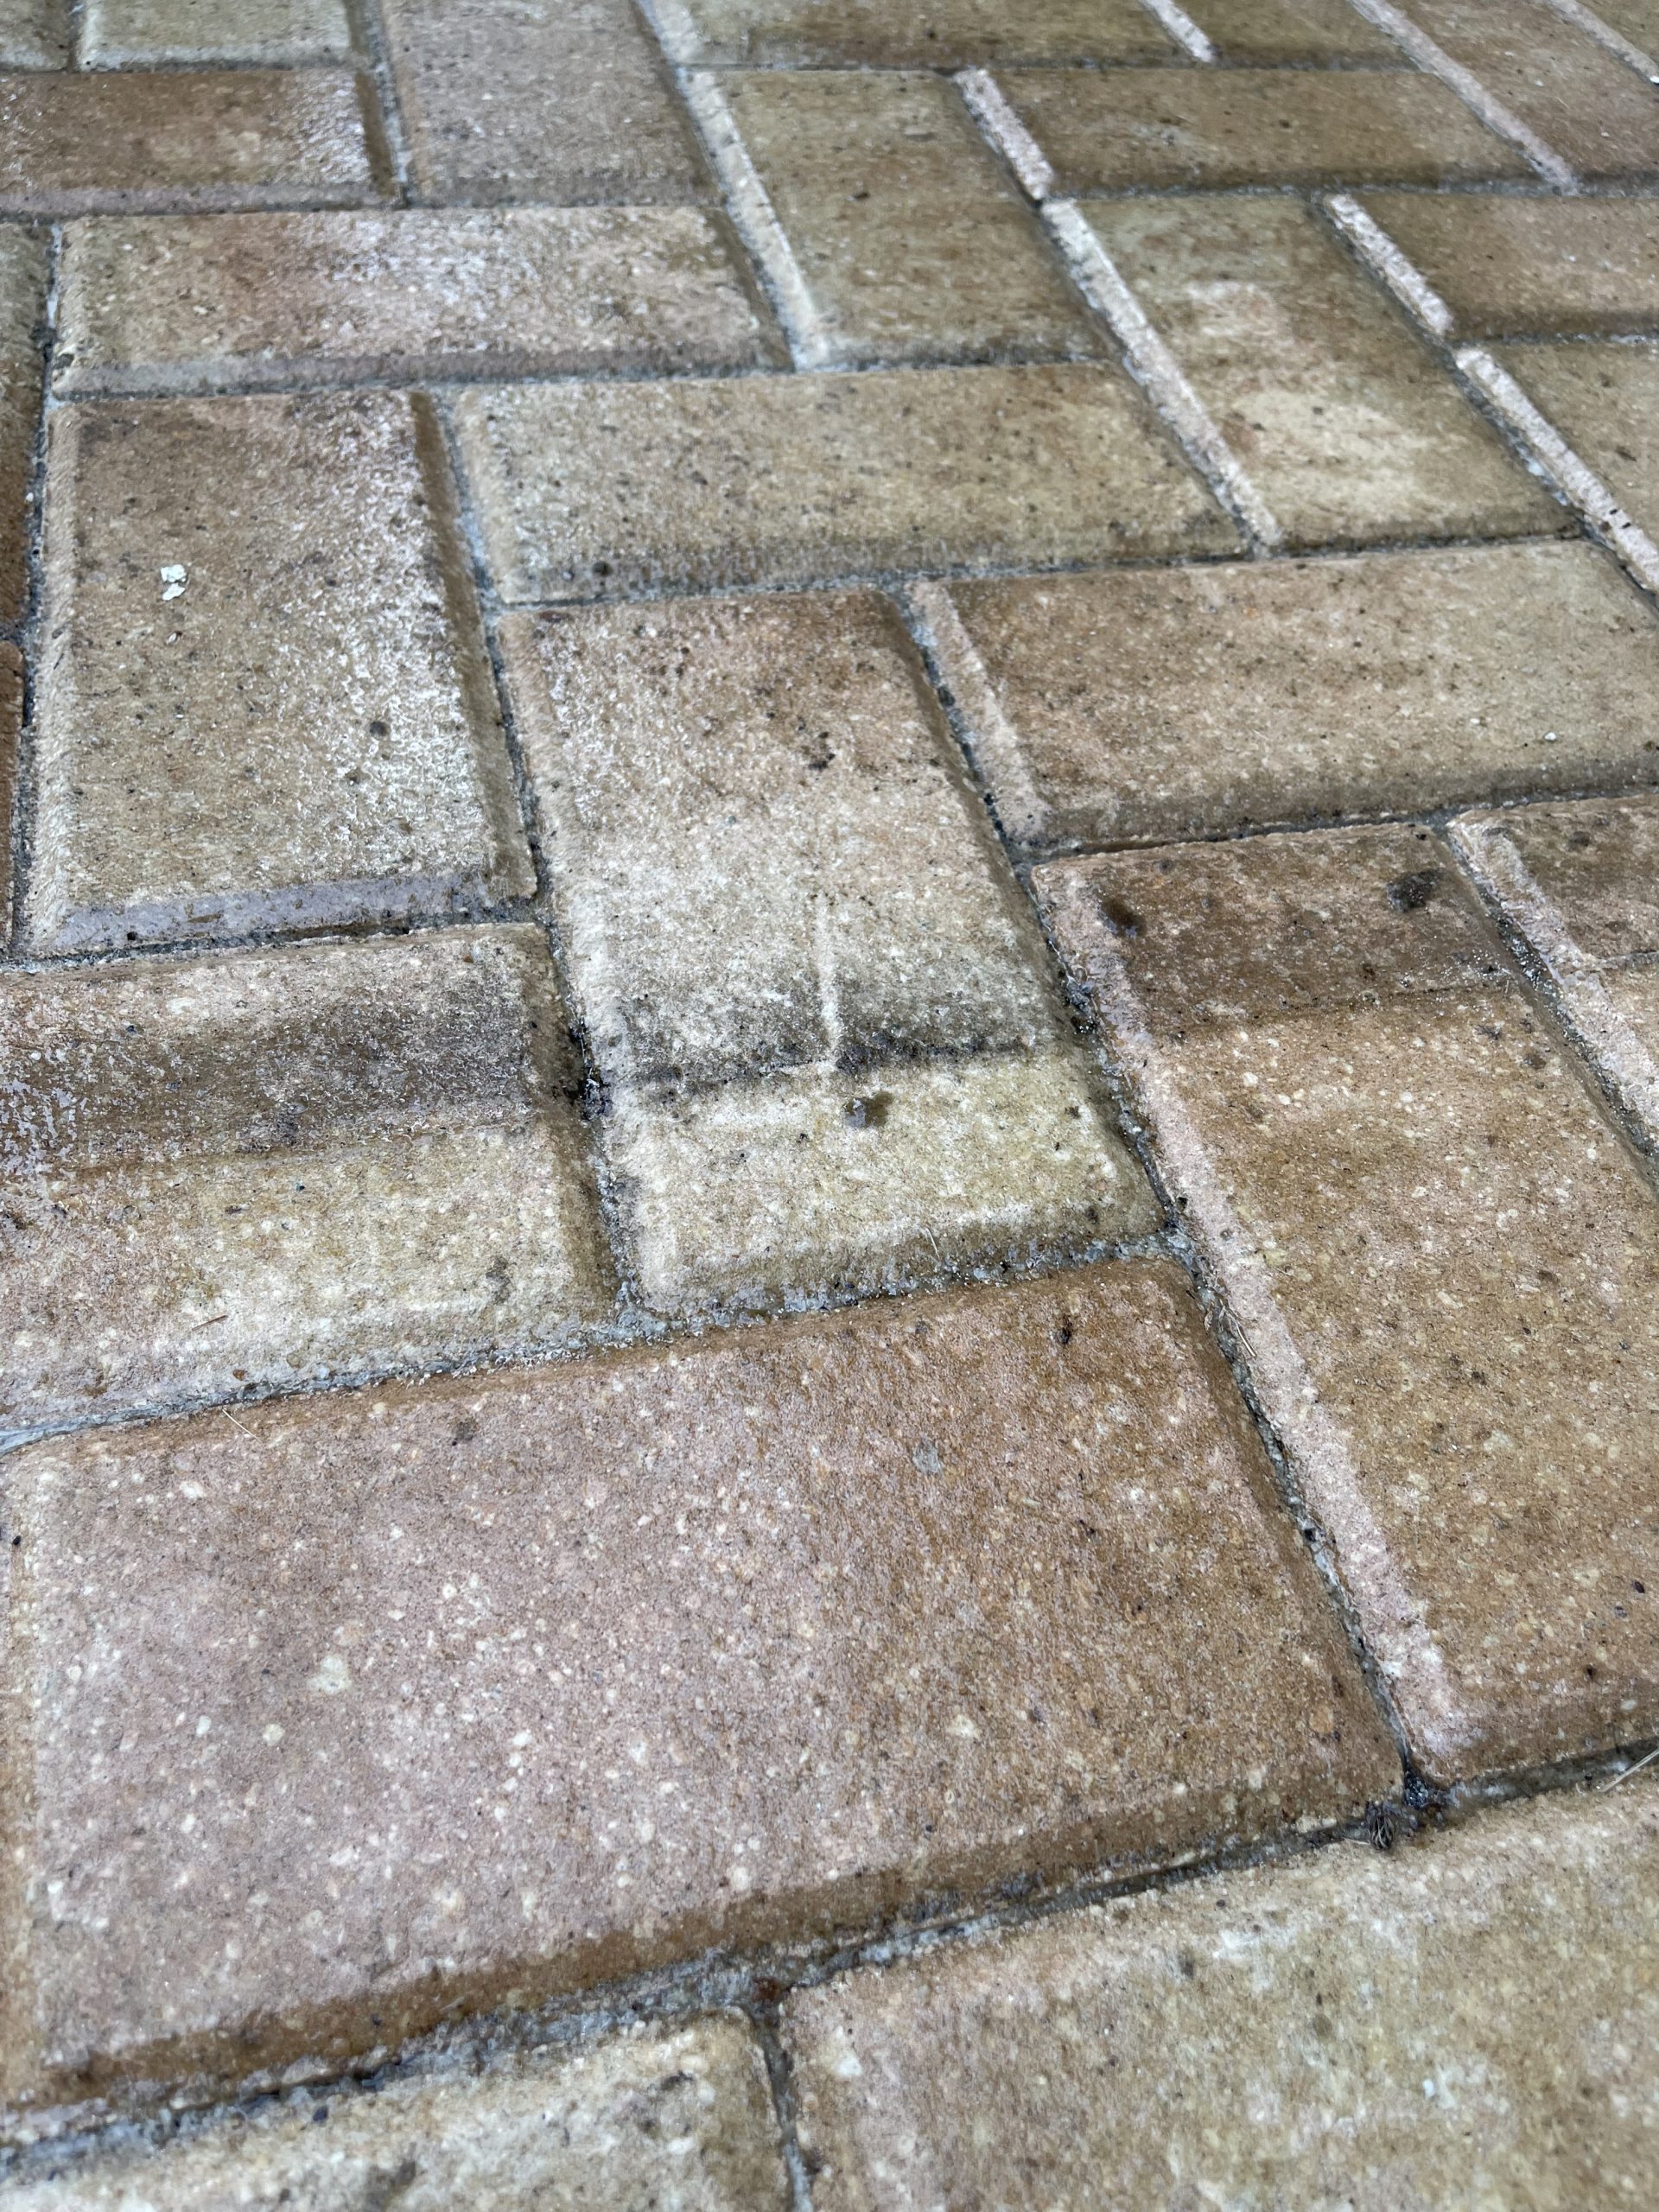 Paver Sealer Remover And Paint Stripper Information – The Paver